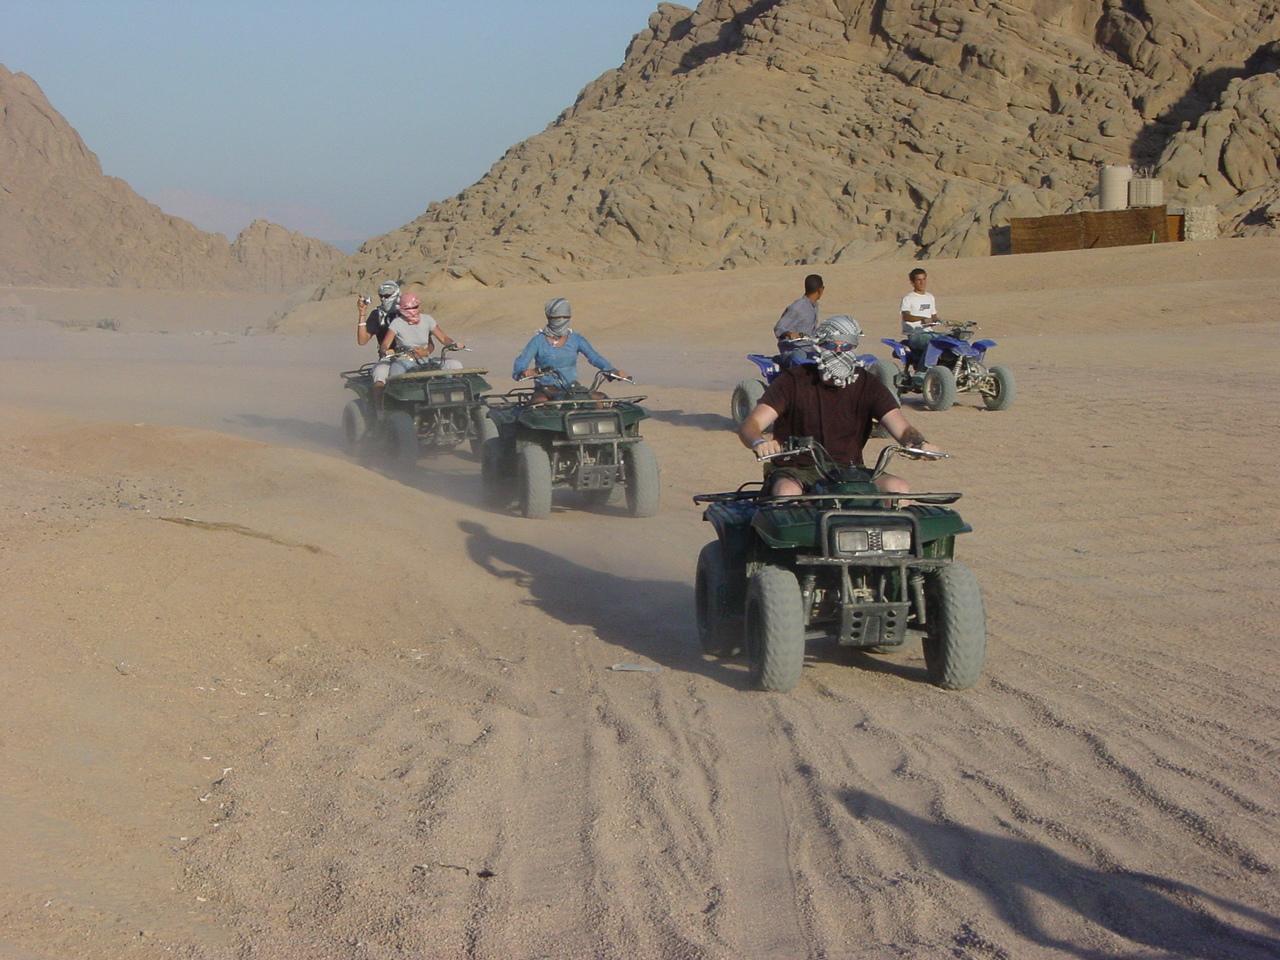 Danger zone: quad bikes ridden by British holidaymakers in Egypt